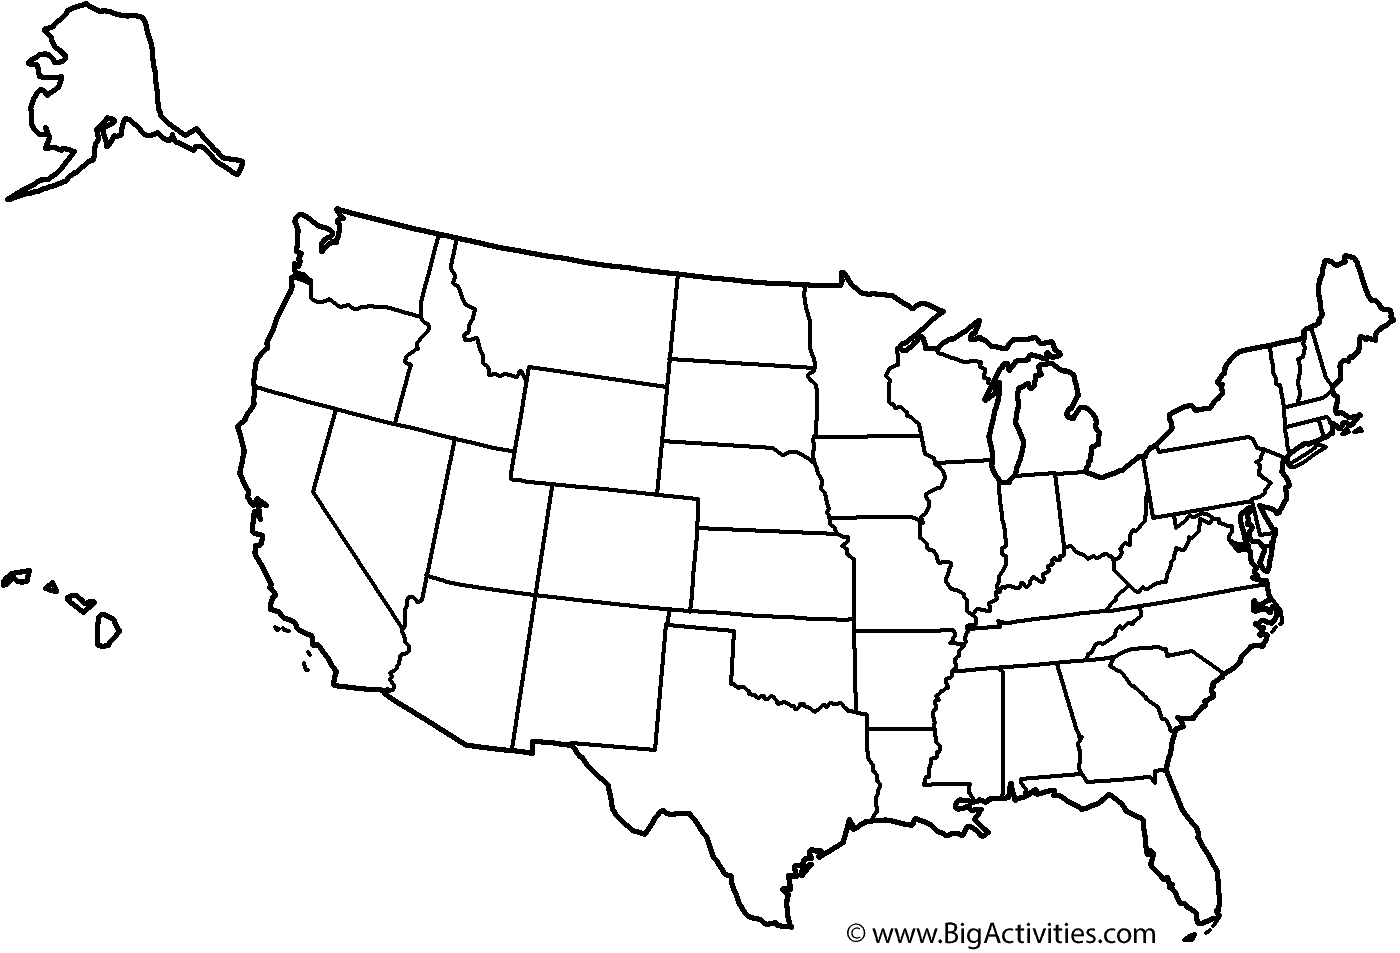 Download Map of the United States with theme and states - Coloring Page (Presidents' Day)